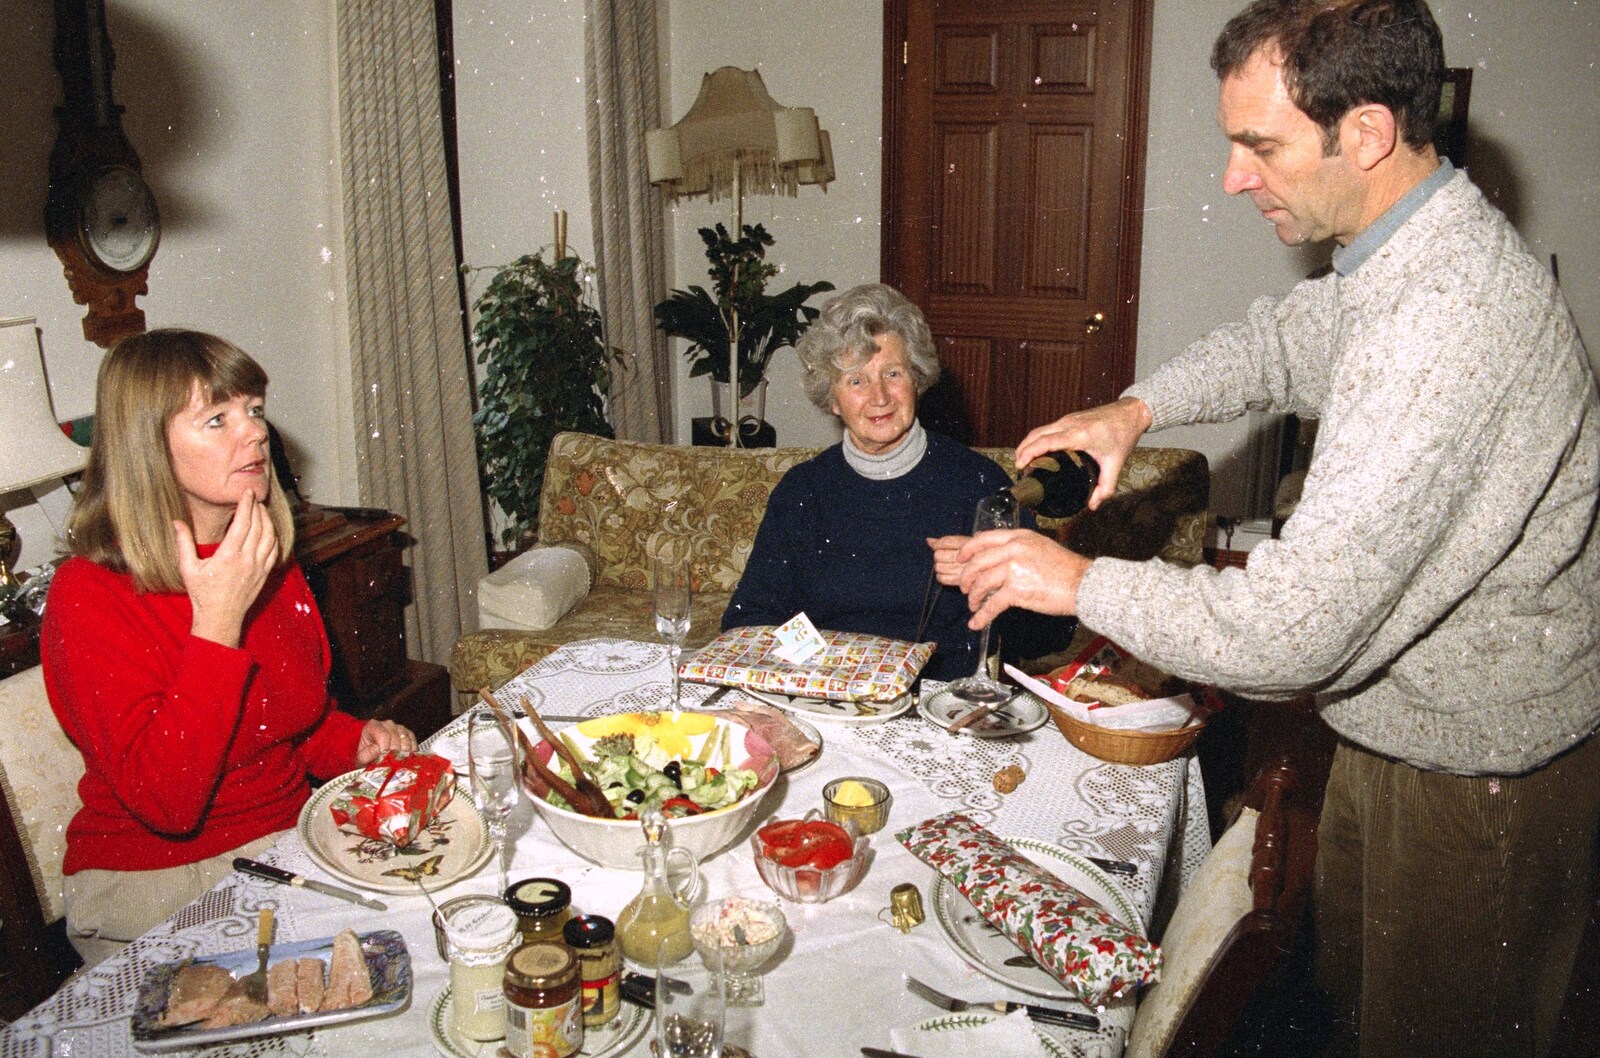 Mike pours some Champagne from Christmas in Devon and Stuston - 25th December 1991